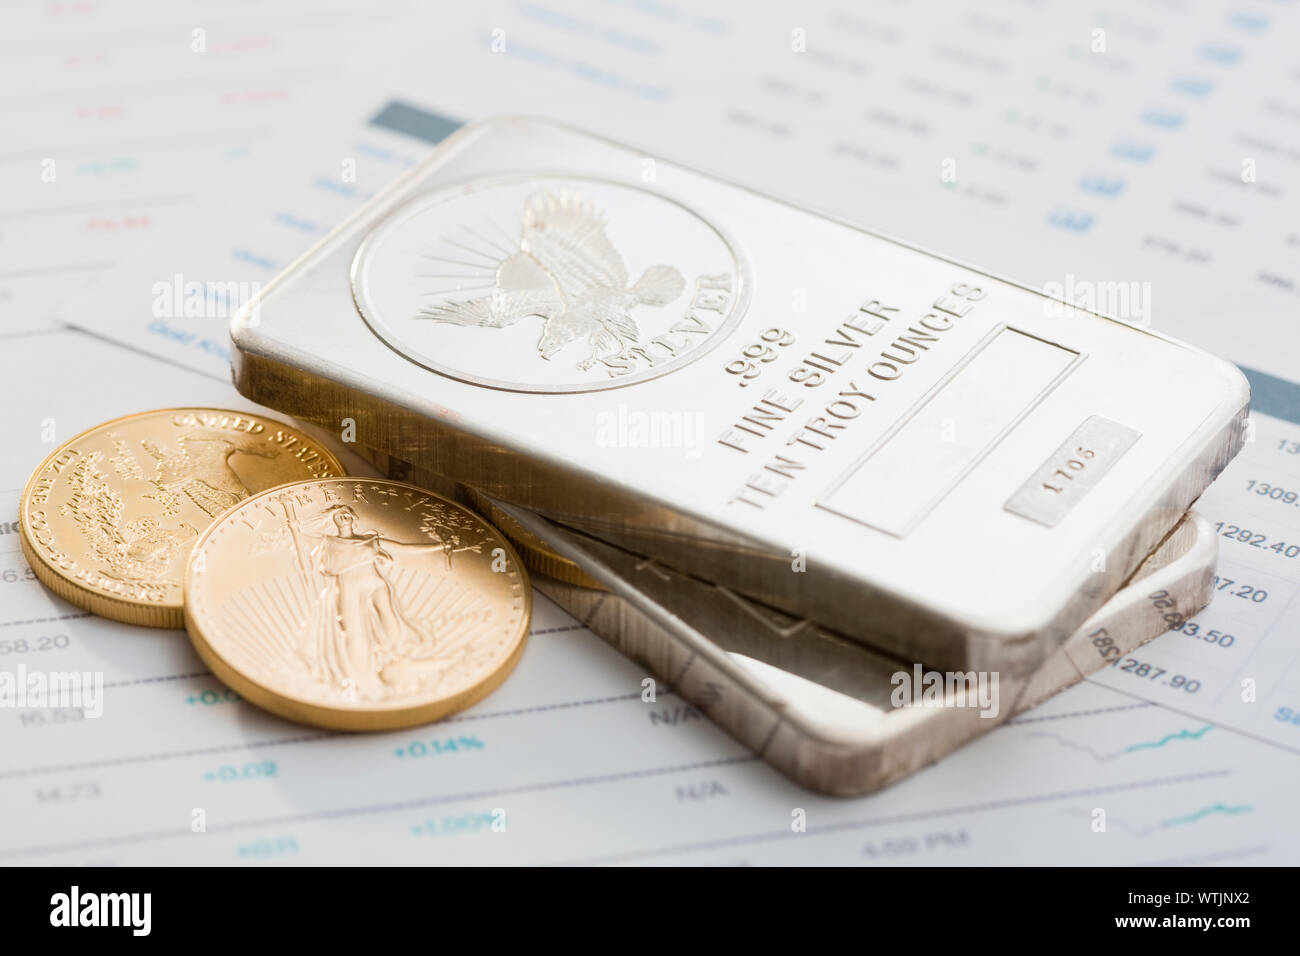 Gold ingots and Gold Eagle coins on stock market data Stock Photo